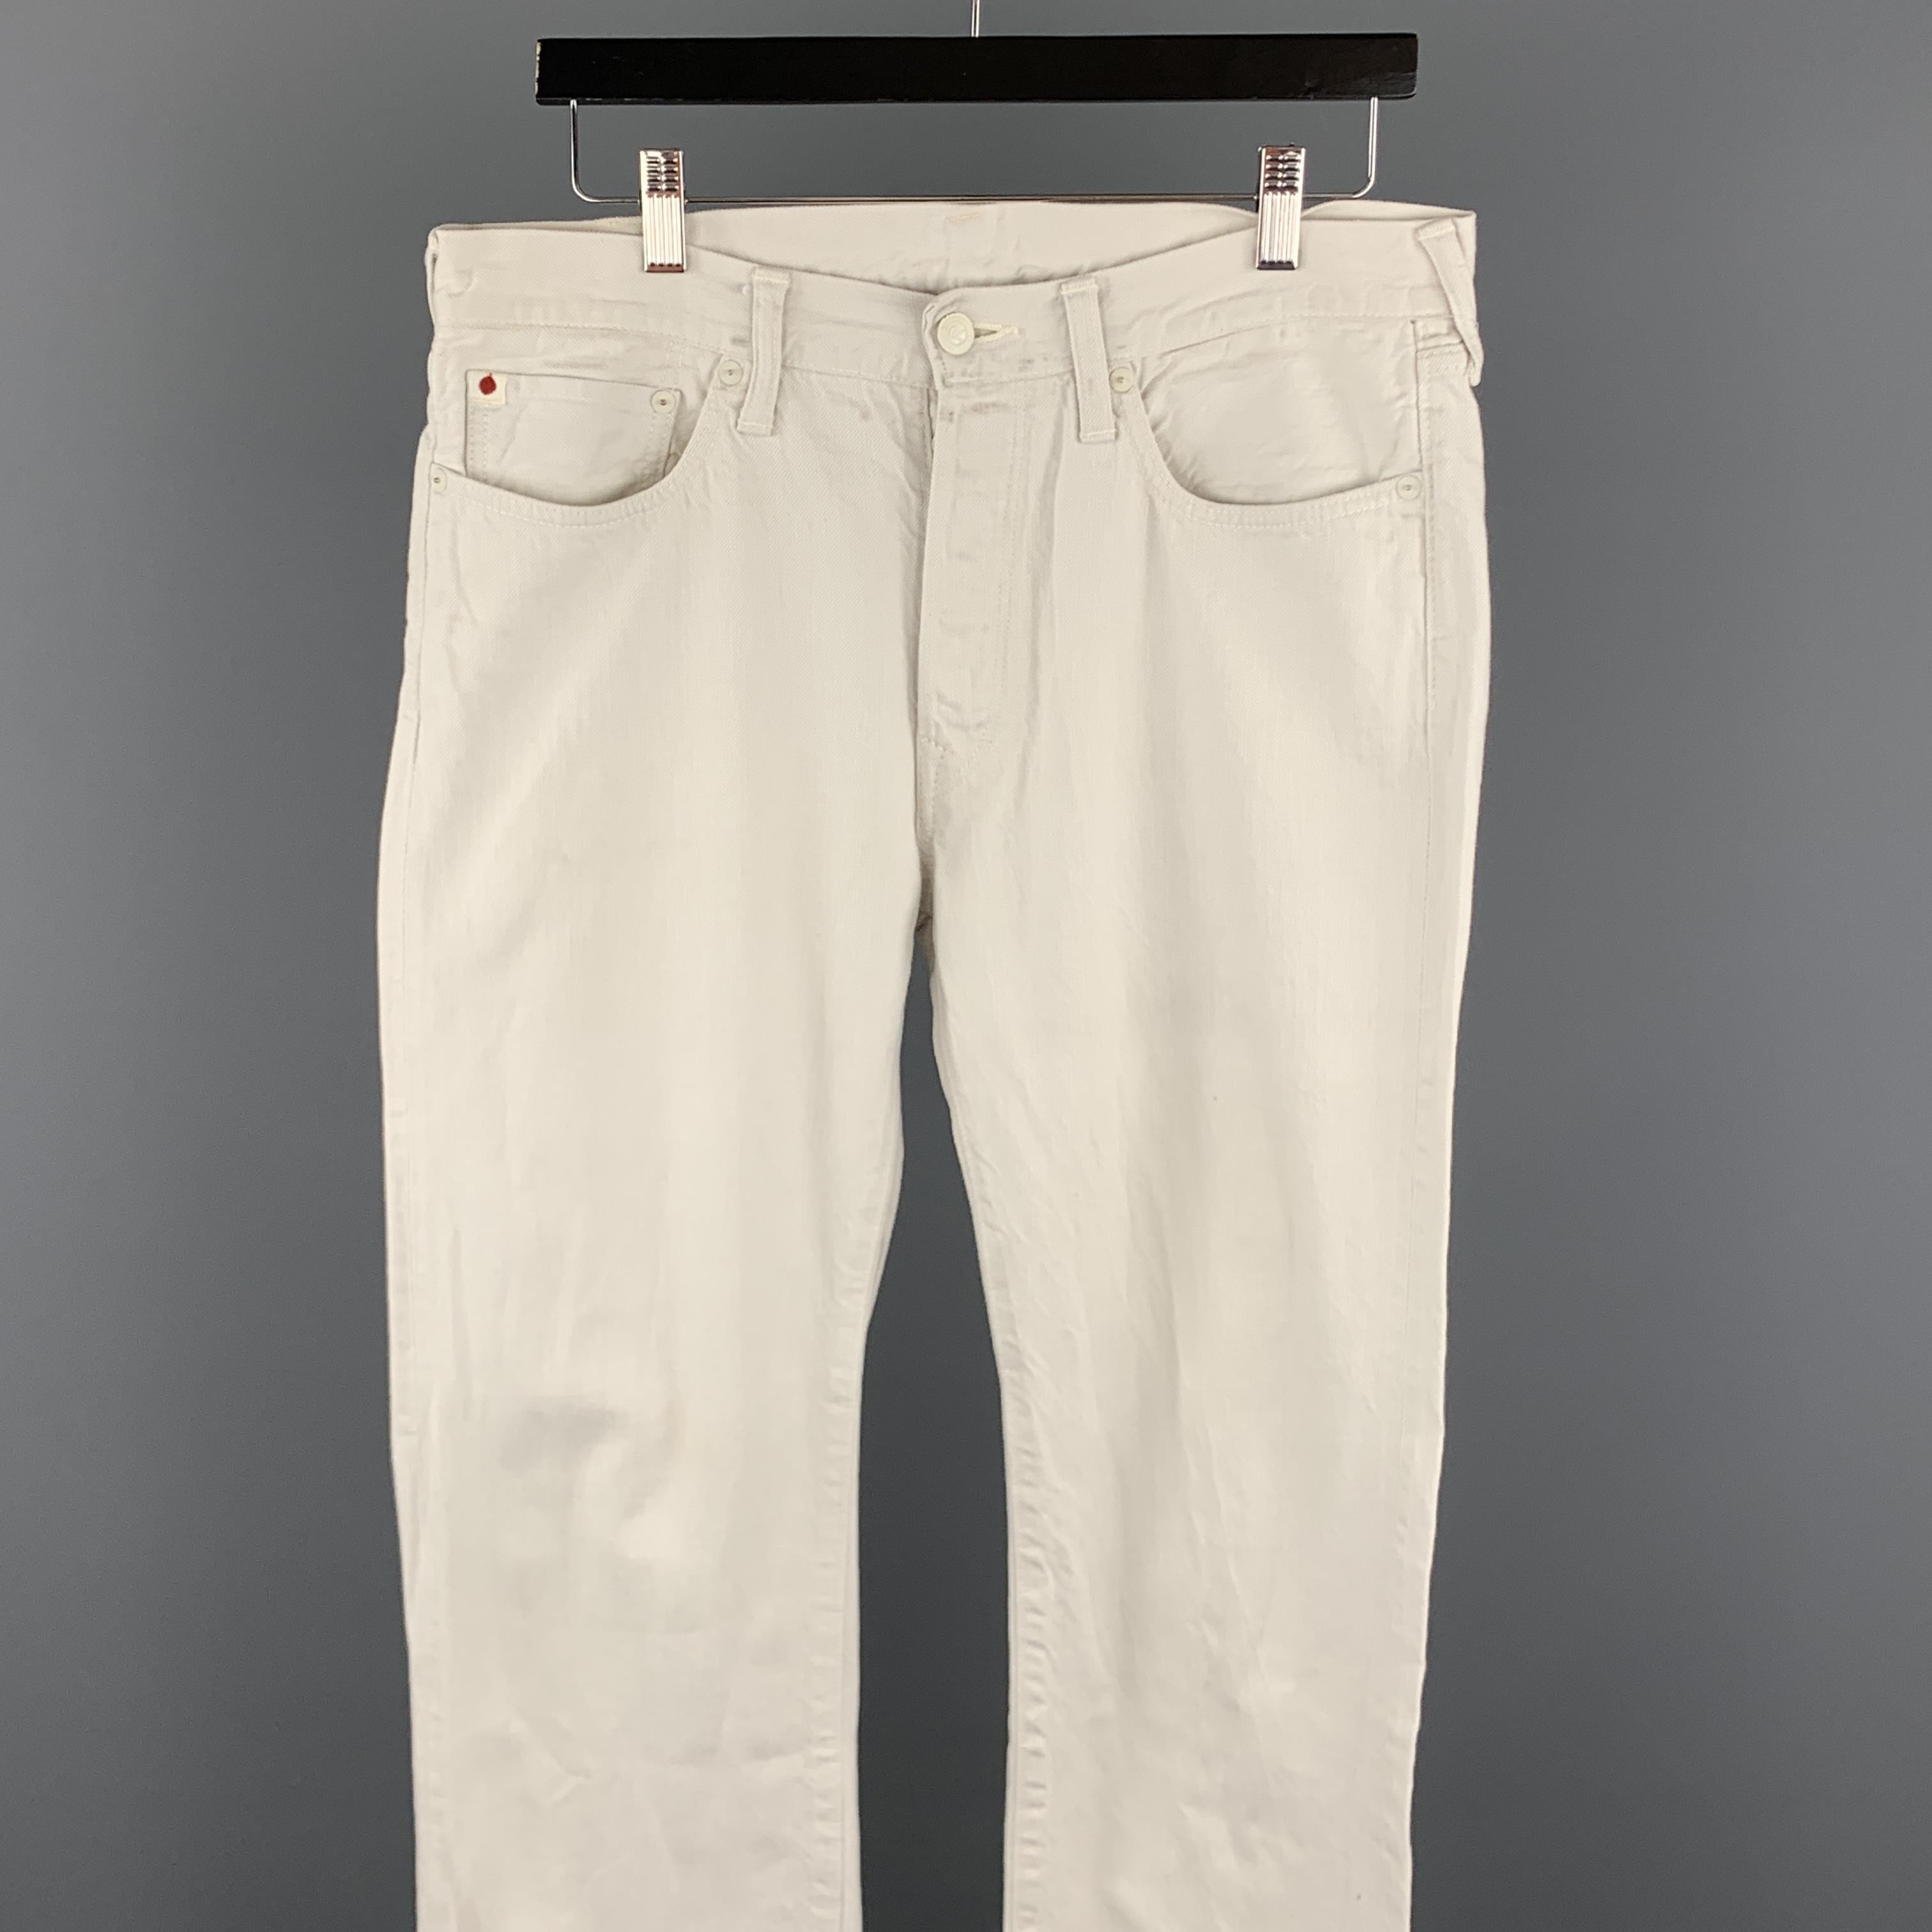 45RPM Jeans come in cream cotton selvedge denim with a button fly and tonal hardware. Made in Japan.

Excellent Pre-Owned Condition.
Marked: 32

Measurements:

Waist: 34 in.
Rise: 10.5 in.
Inseam: 36 in.
SKU: 100017
Category: Jeans

More